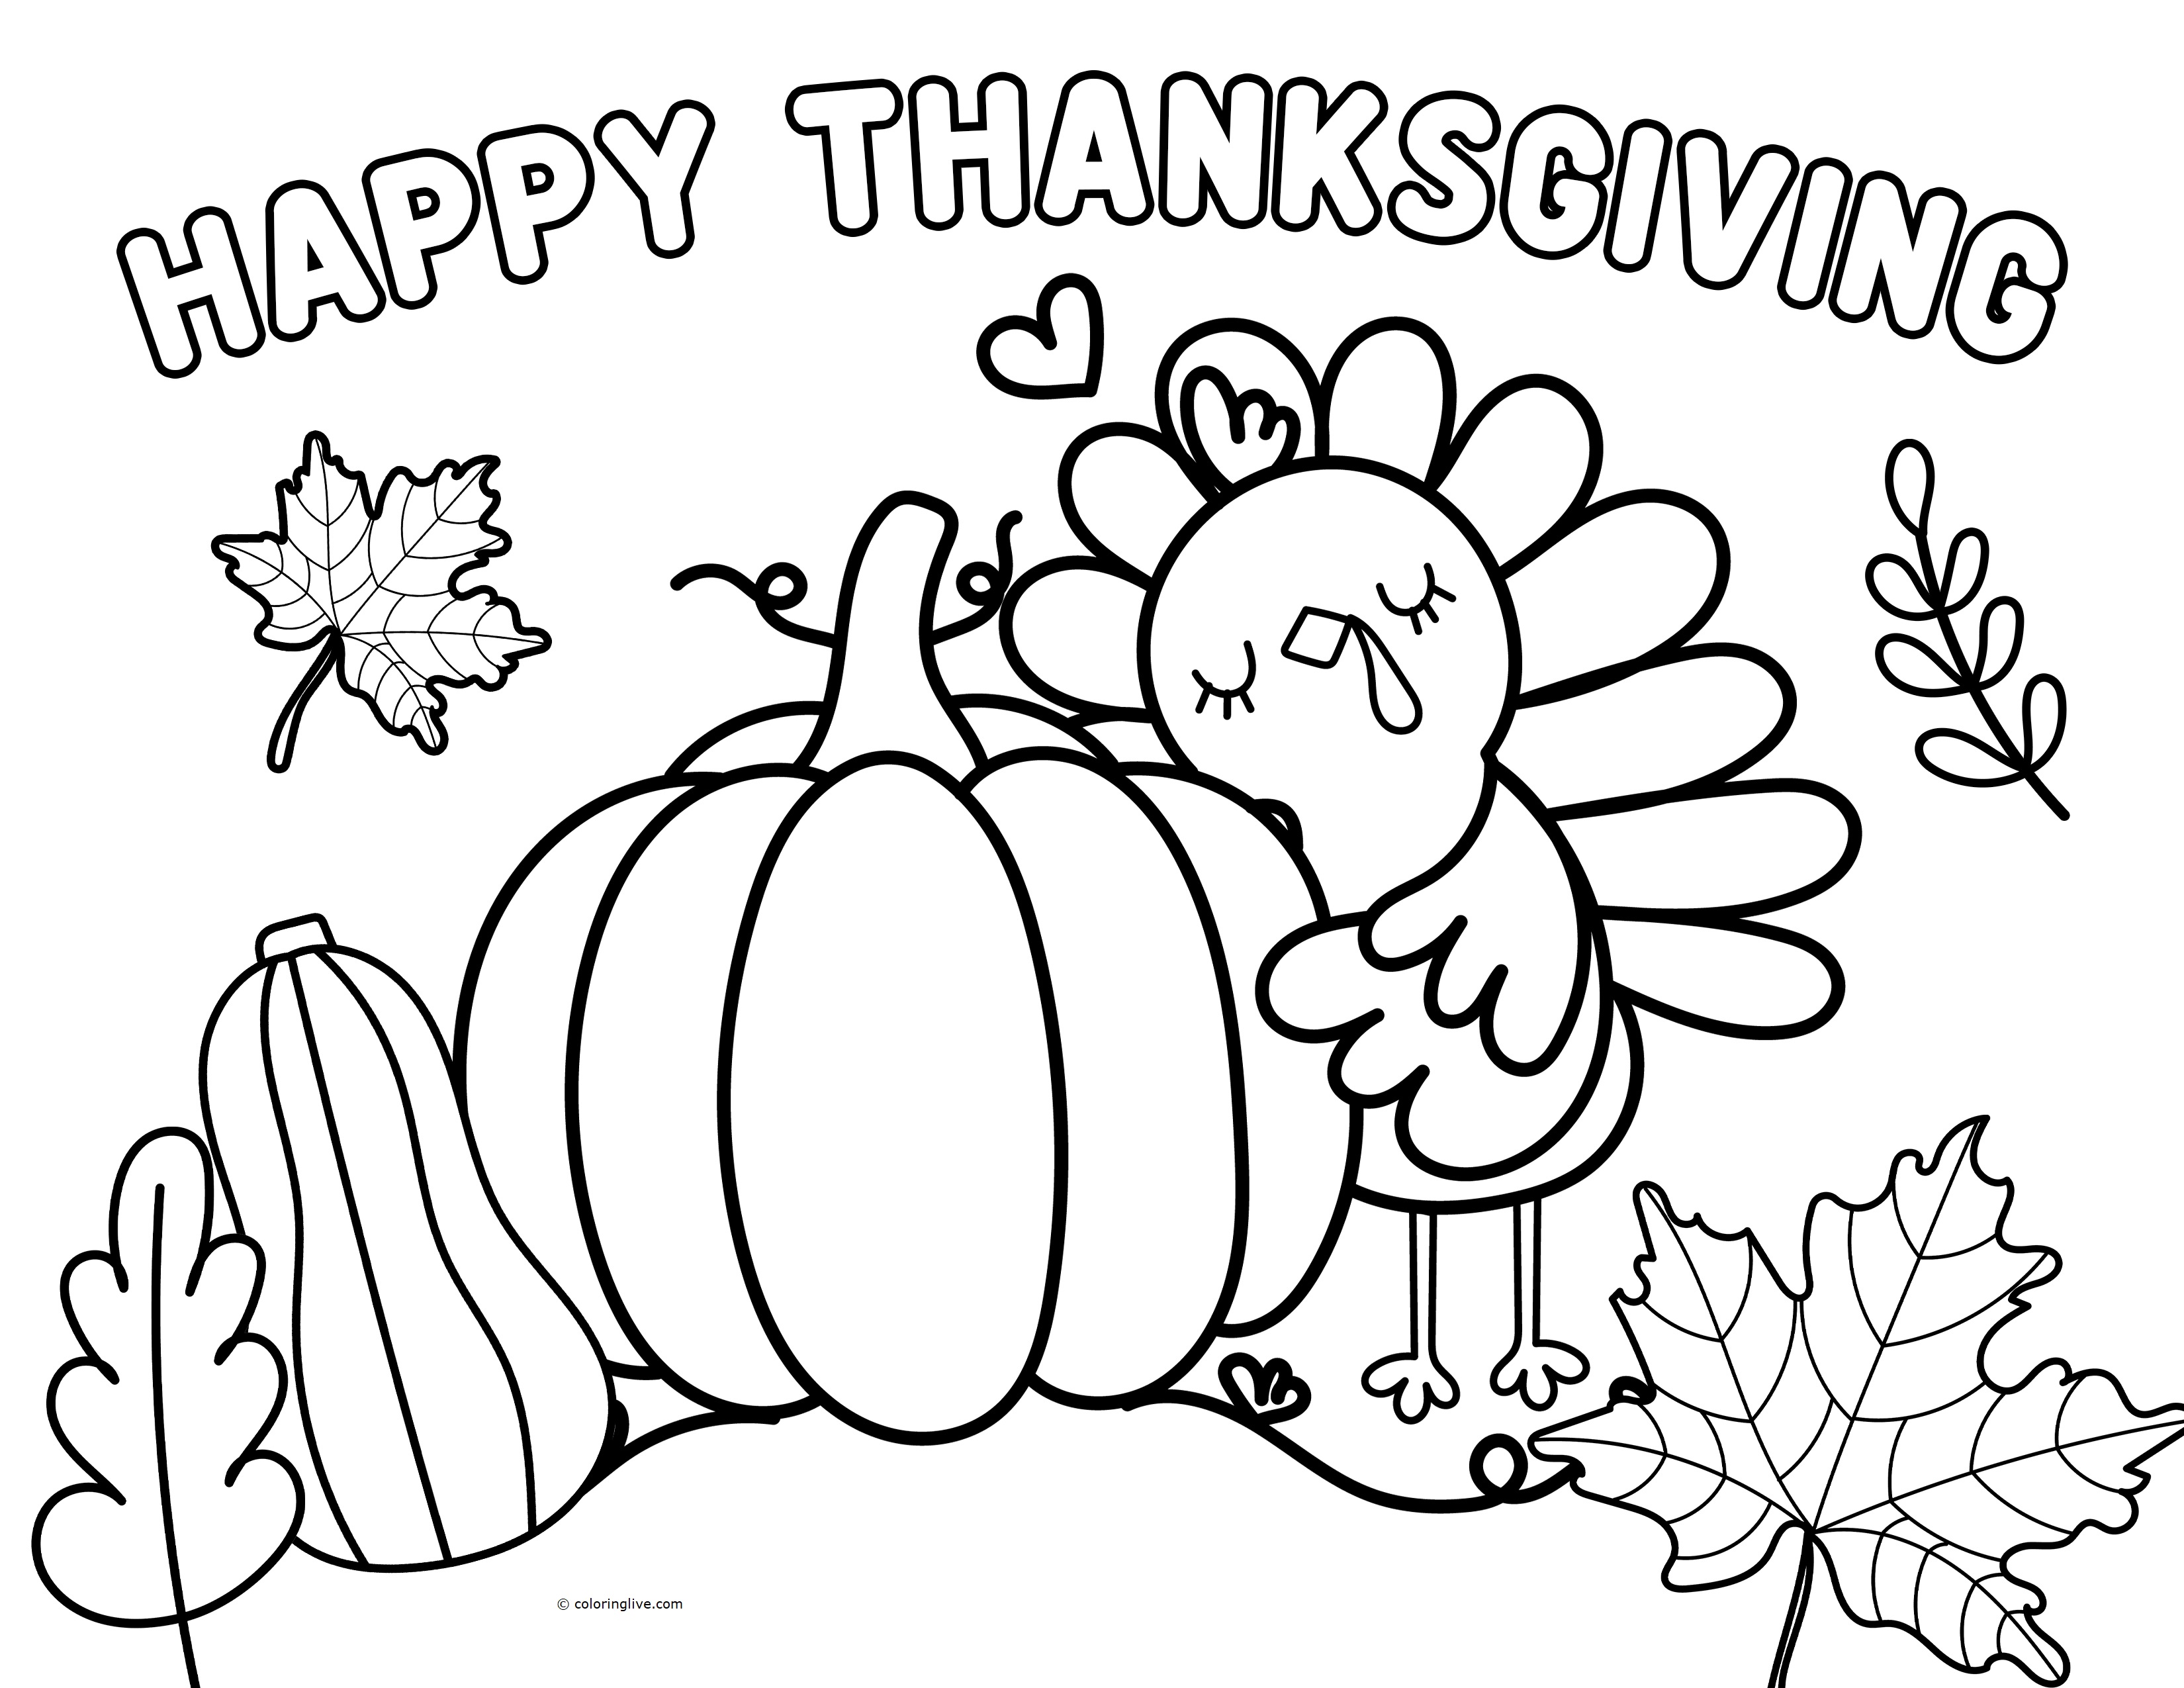 Printable Happy Thanksgiving Leaf Coloring Page for kids.